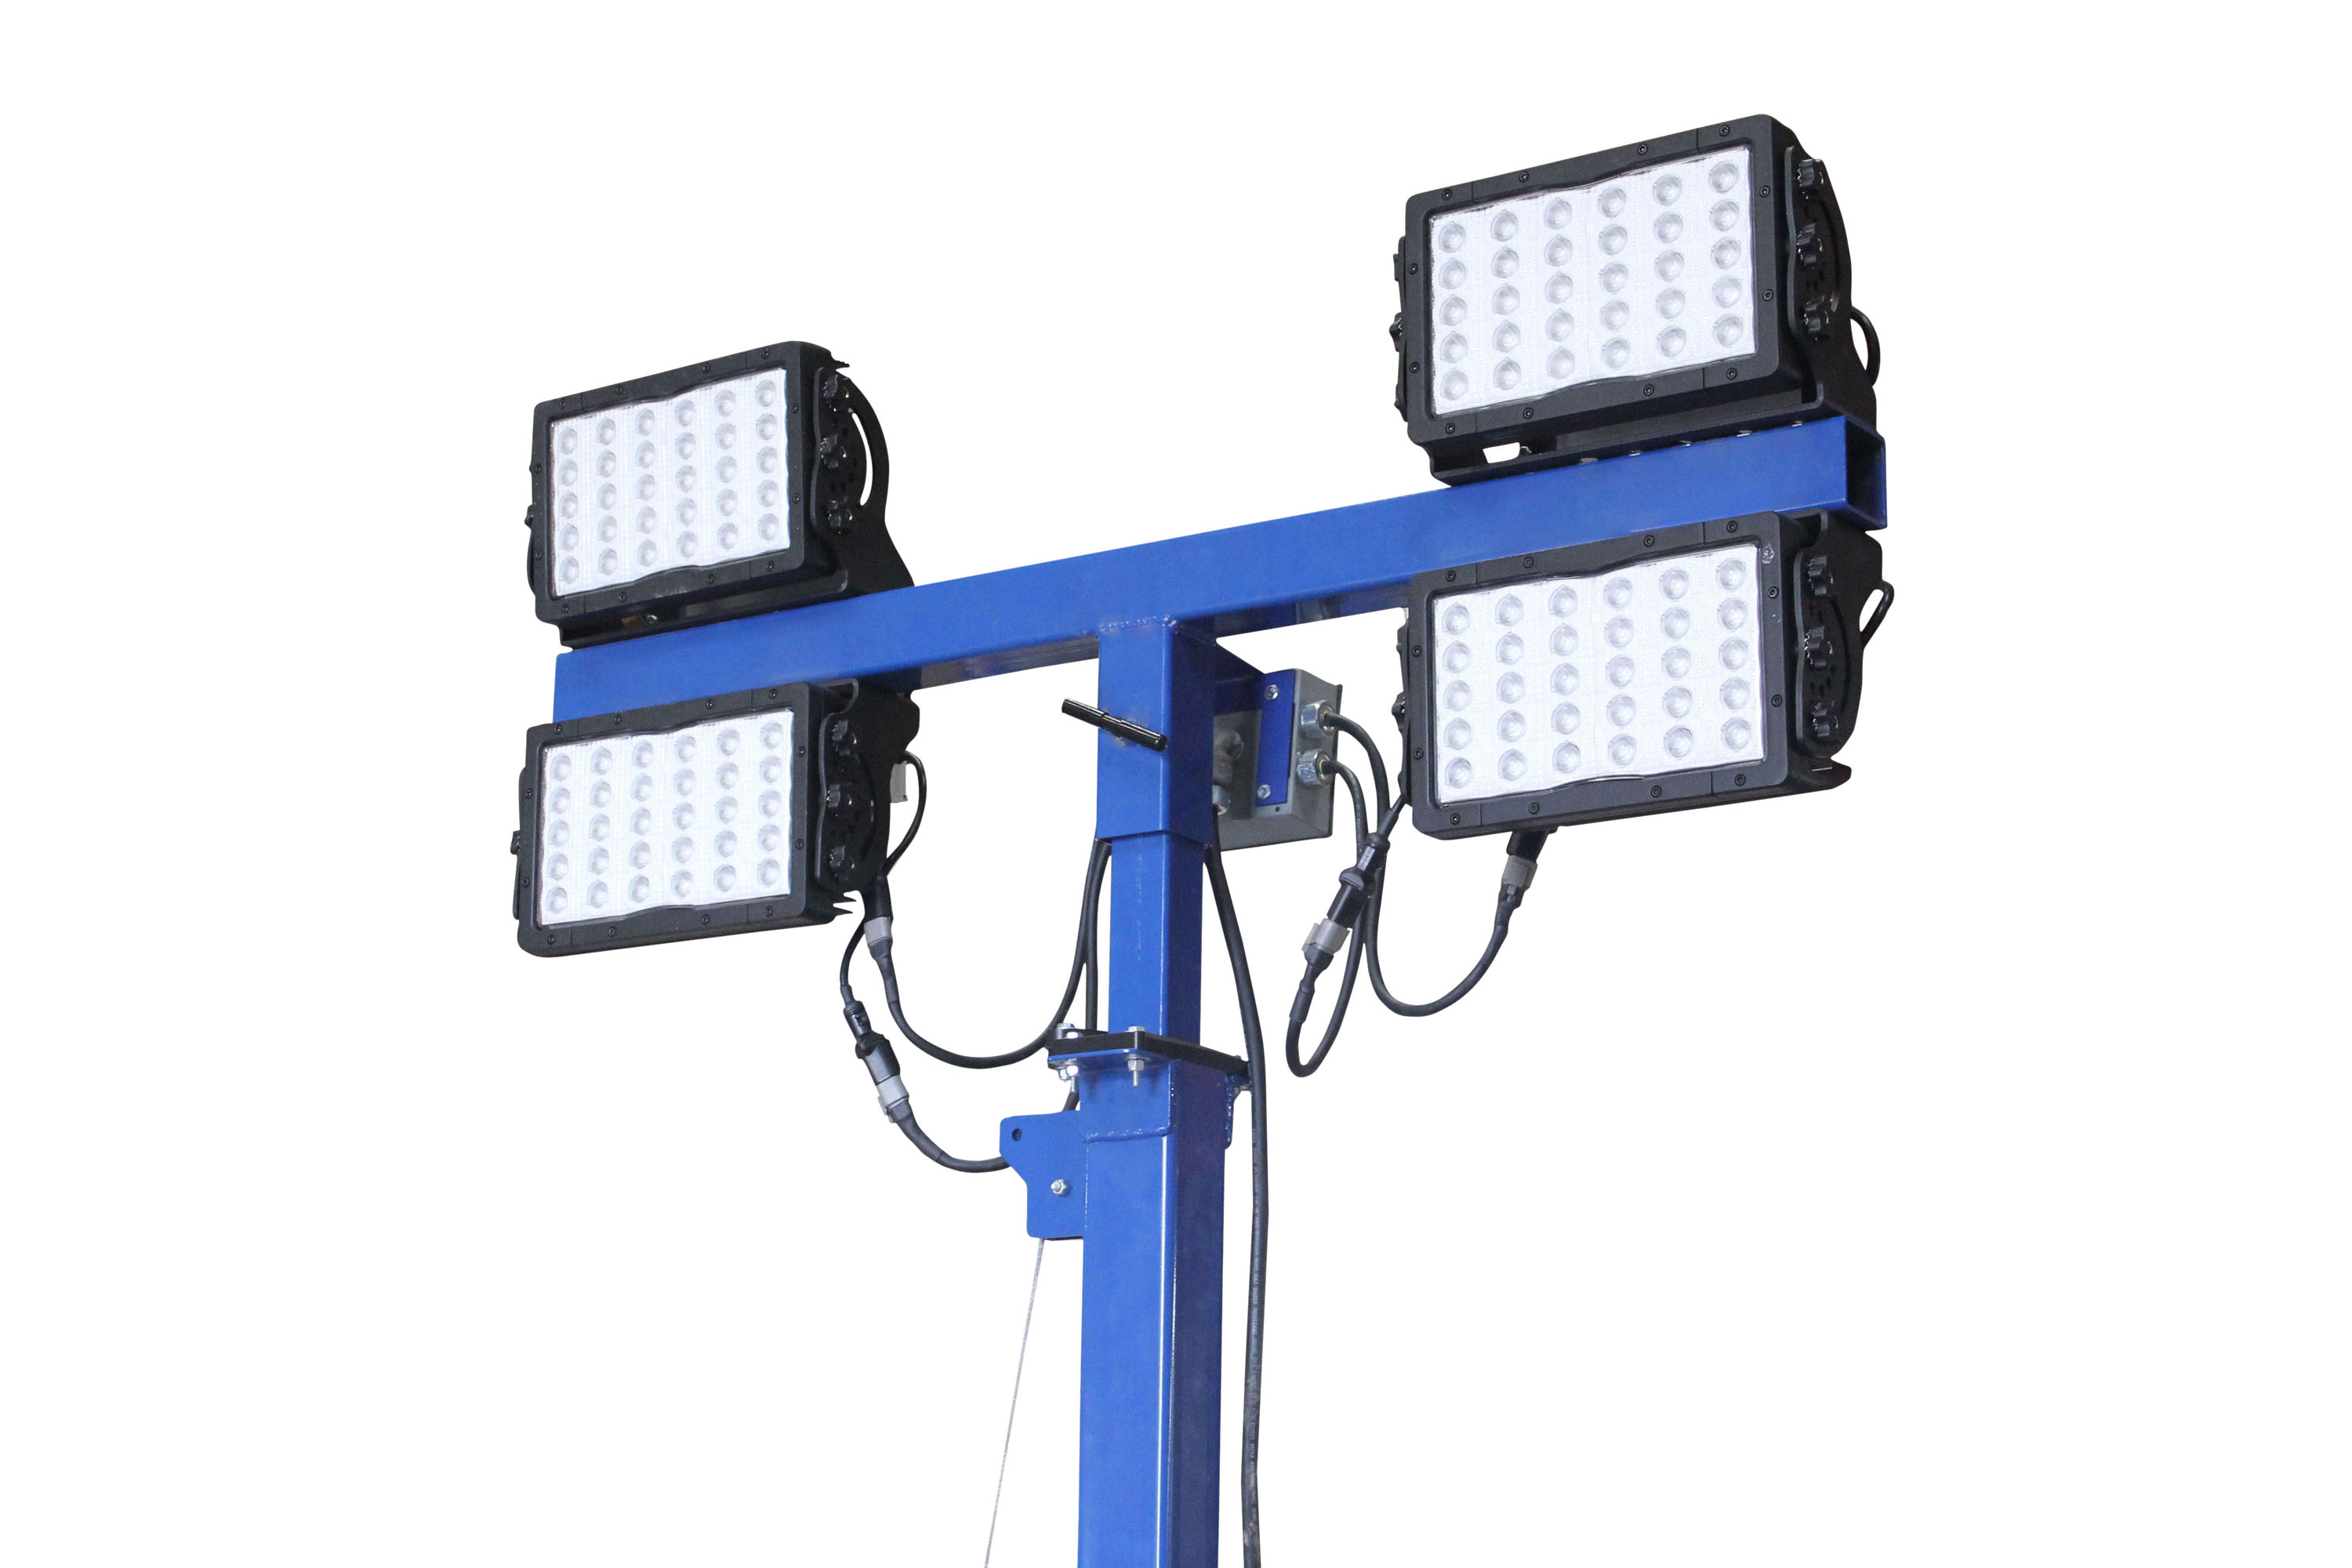 Four 150 Watt LED Light Heads mounted on a quadpod fabricated from square steel tubing